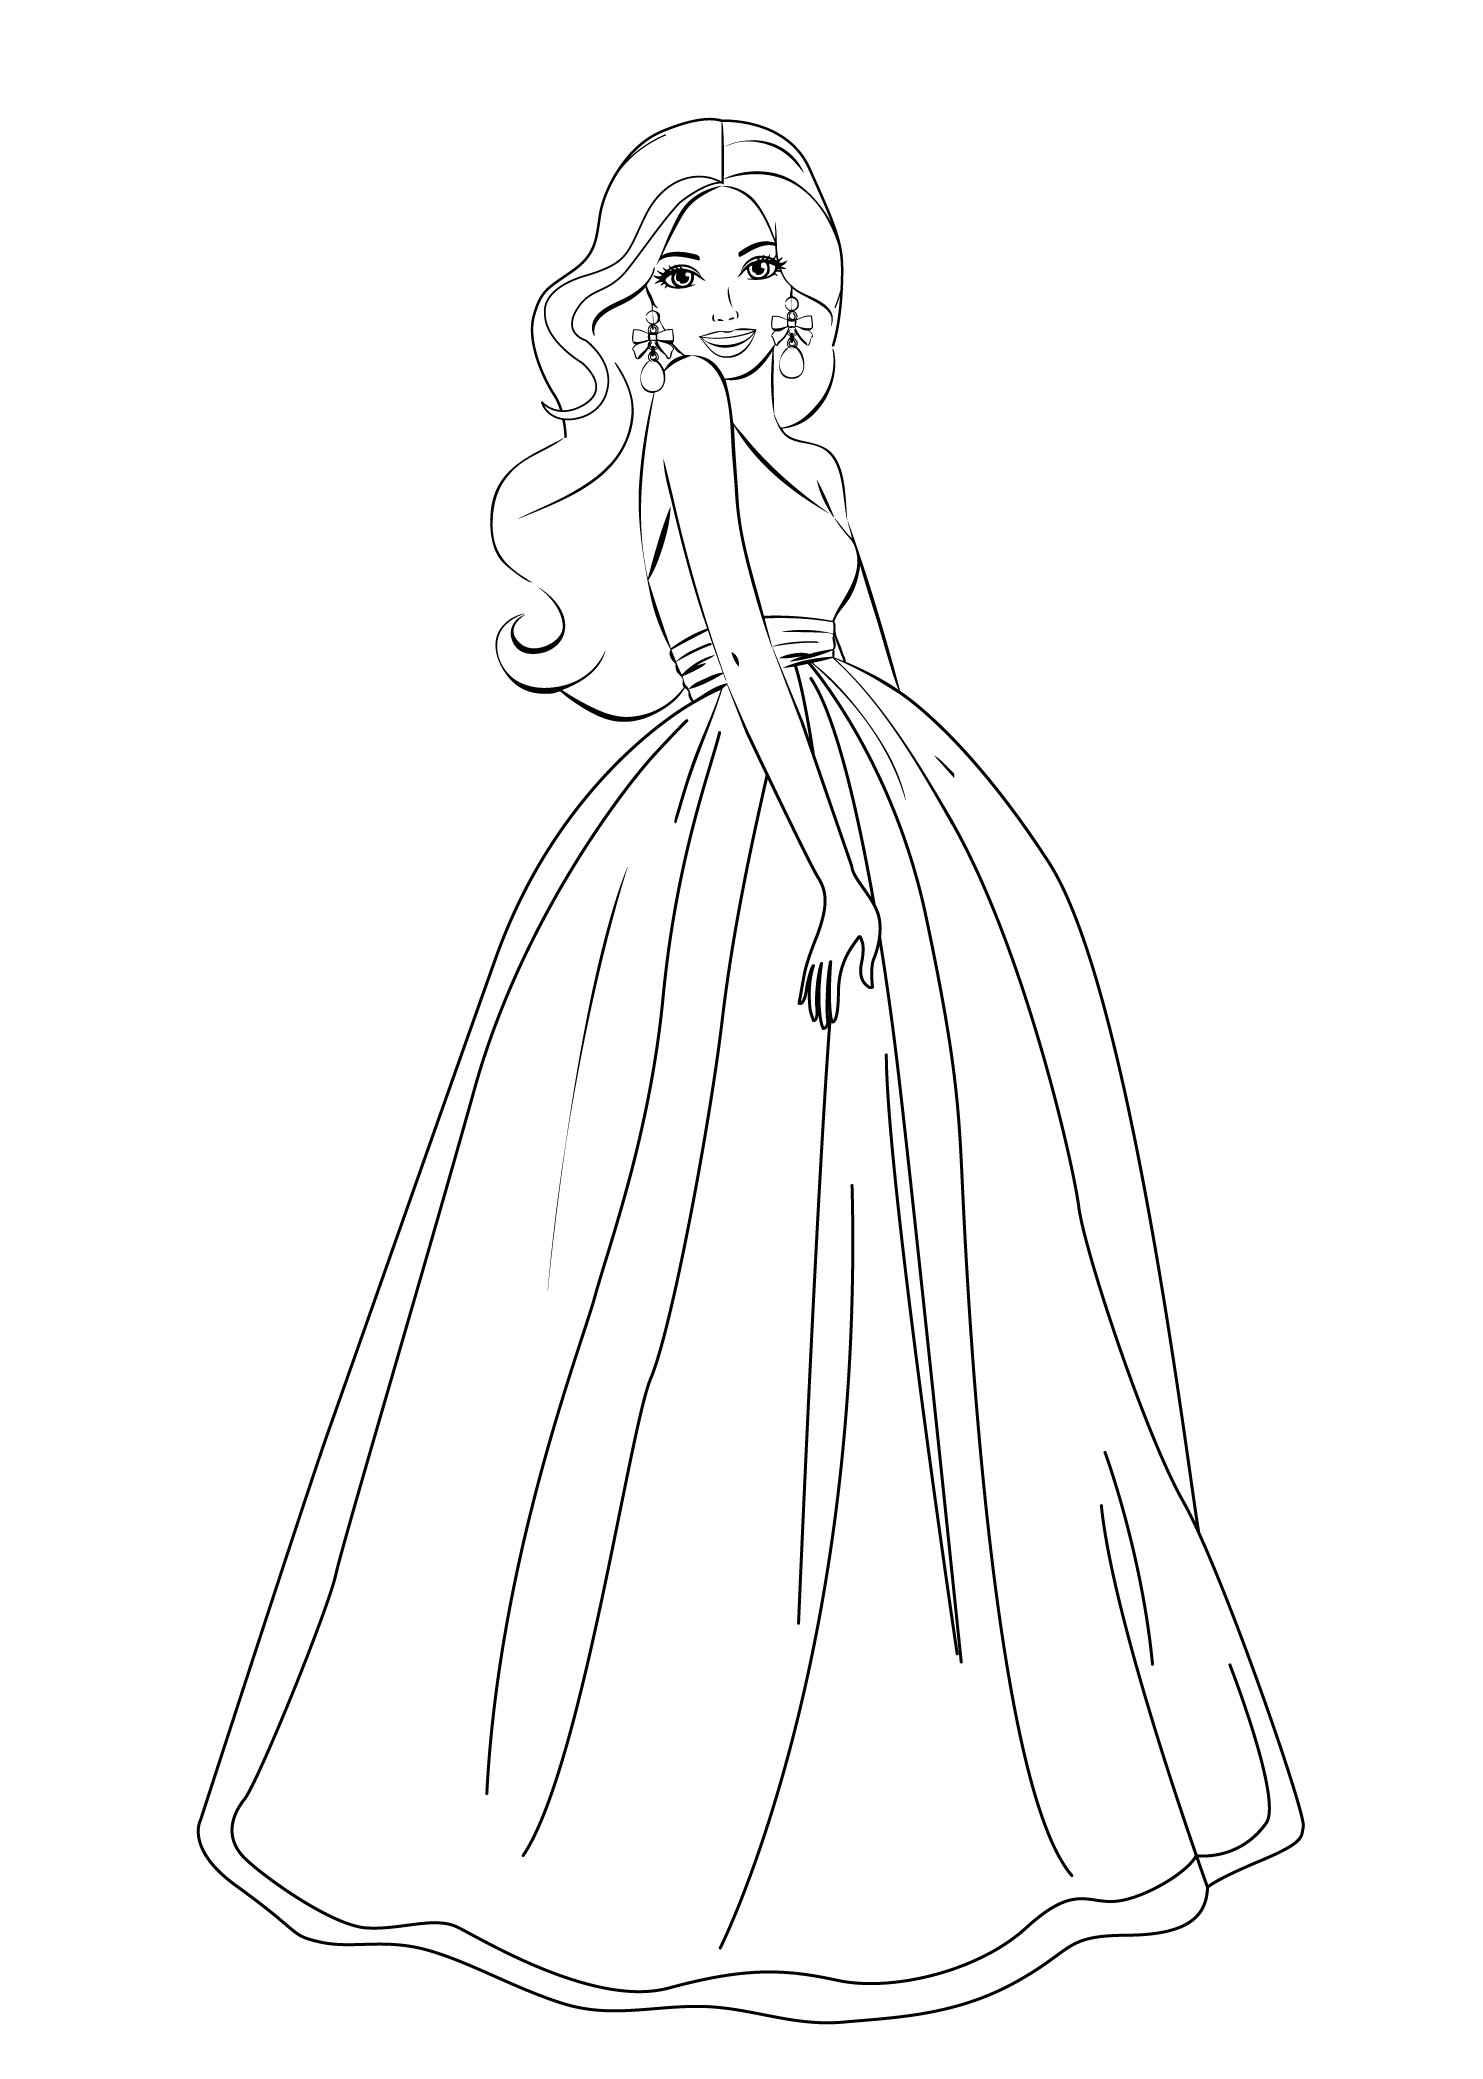 Barbie Coloring Pages For Girls
 Barbie coloring pages for girls free printable